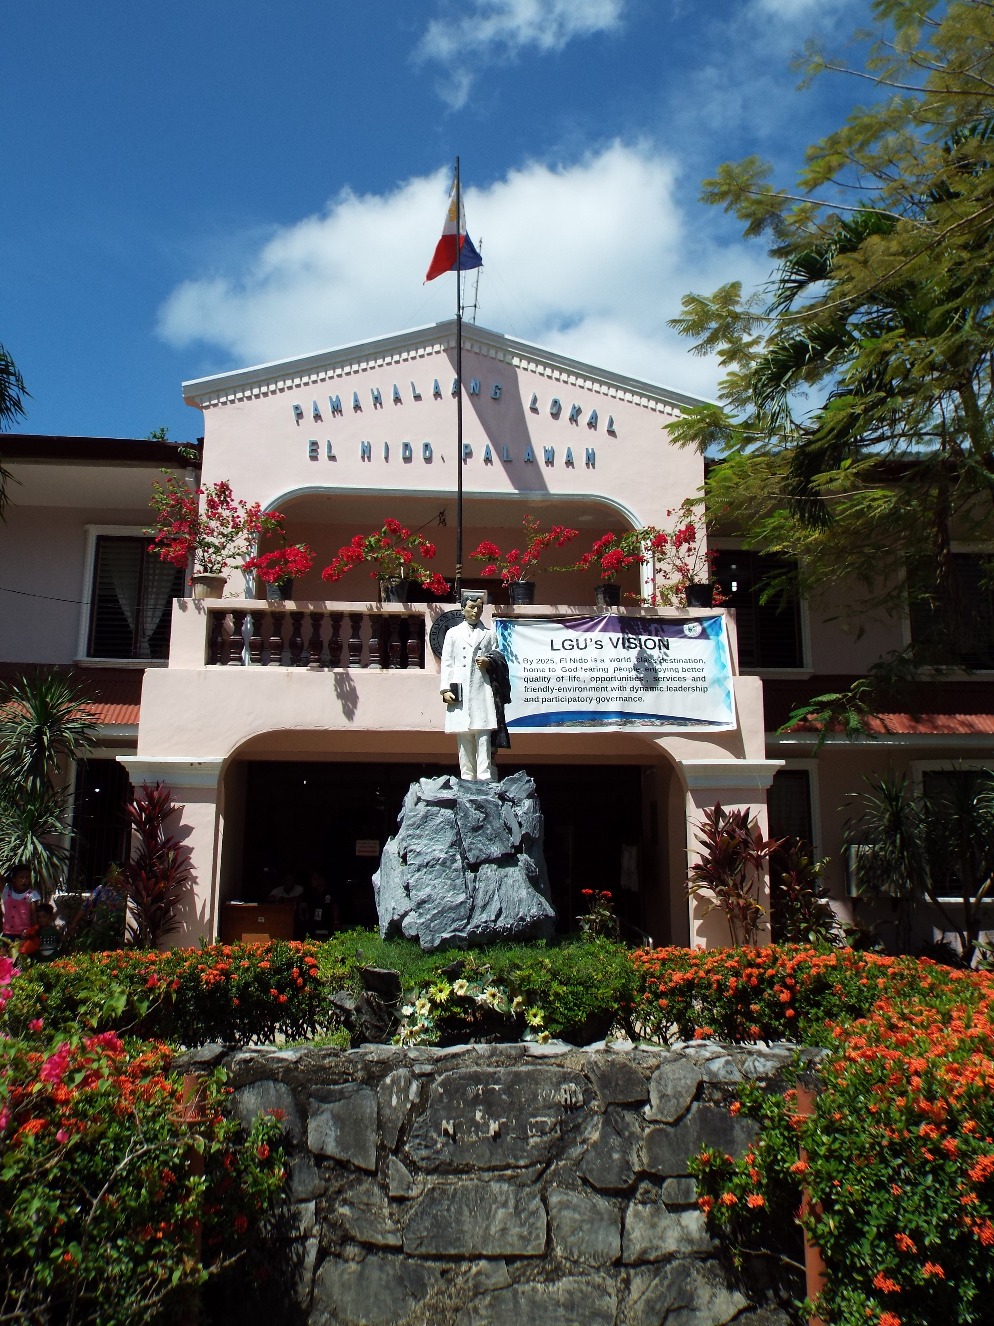 Palawan Local Goverment Building in the town of El Nido